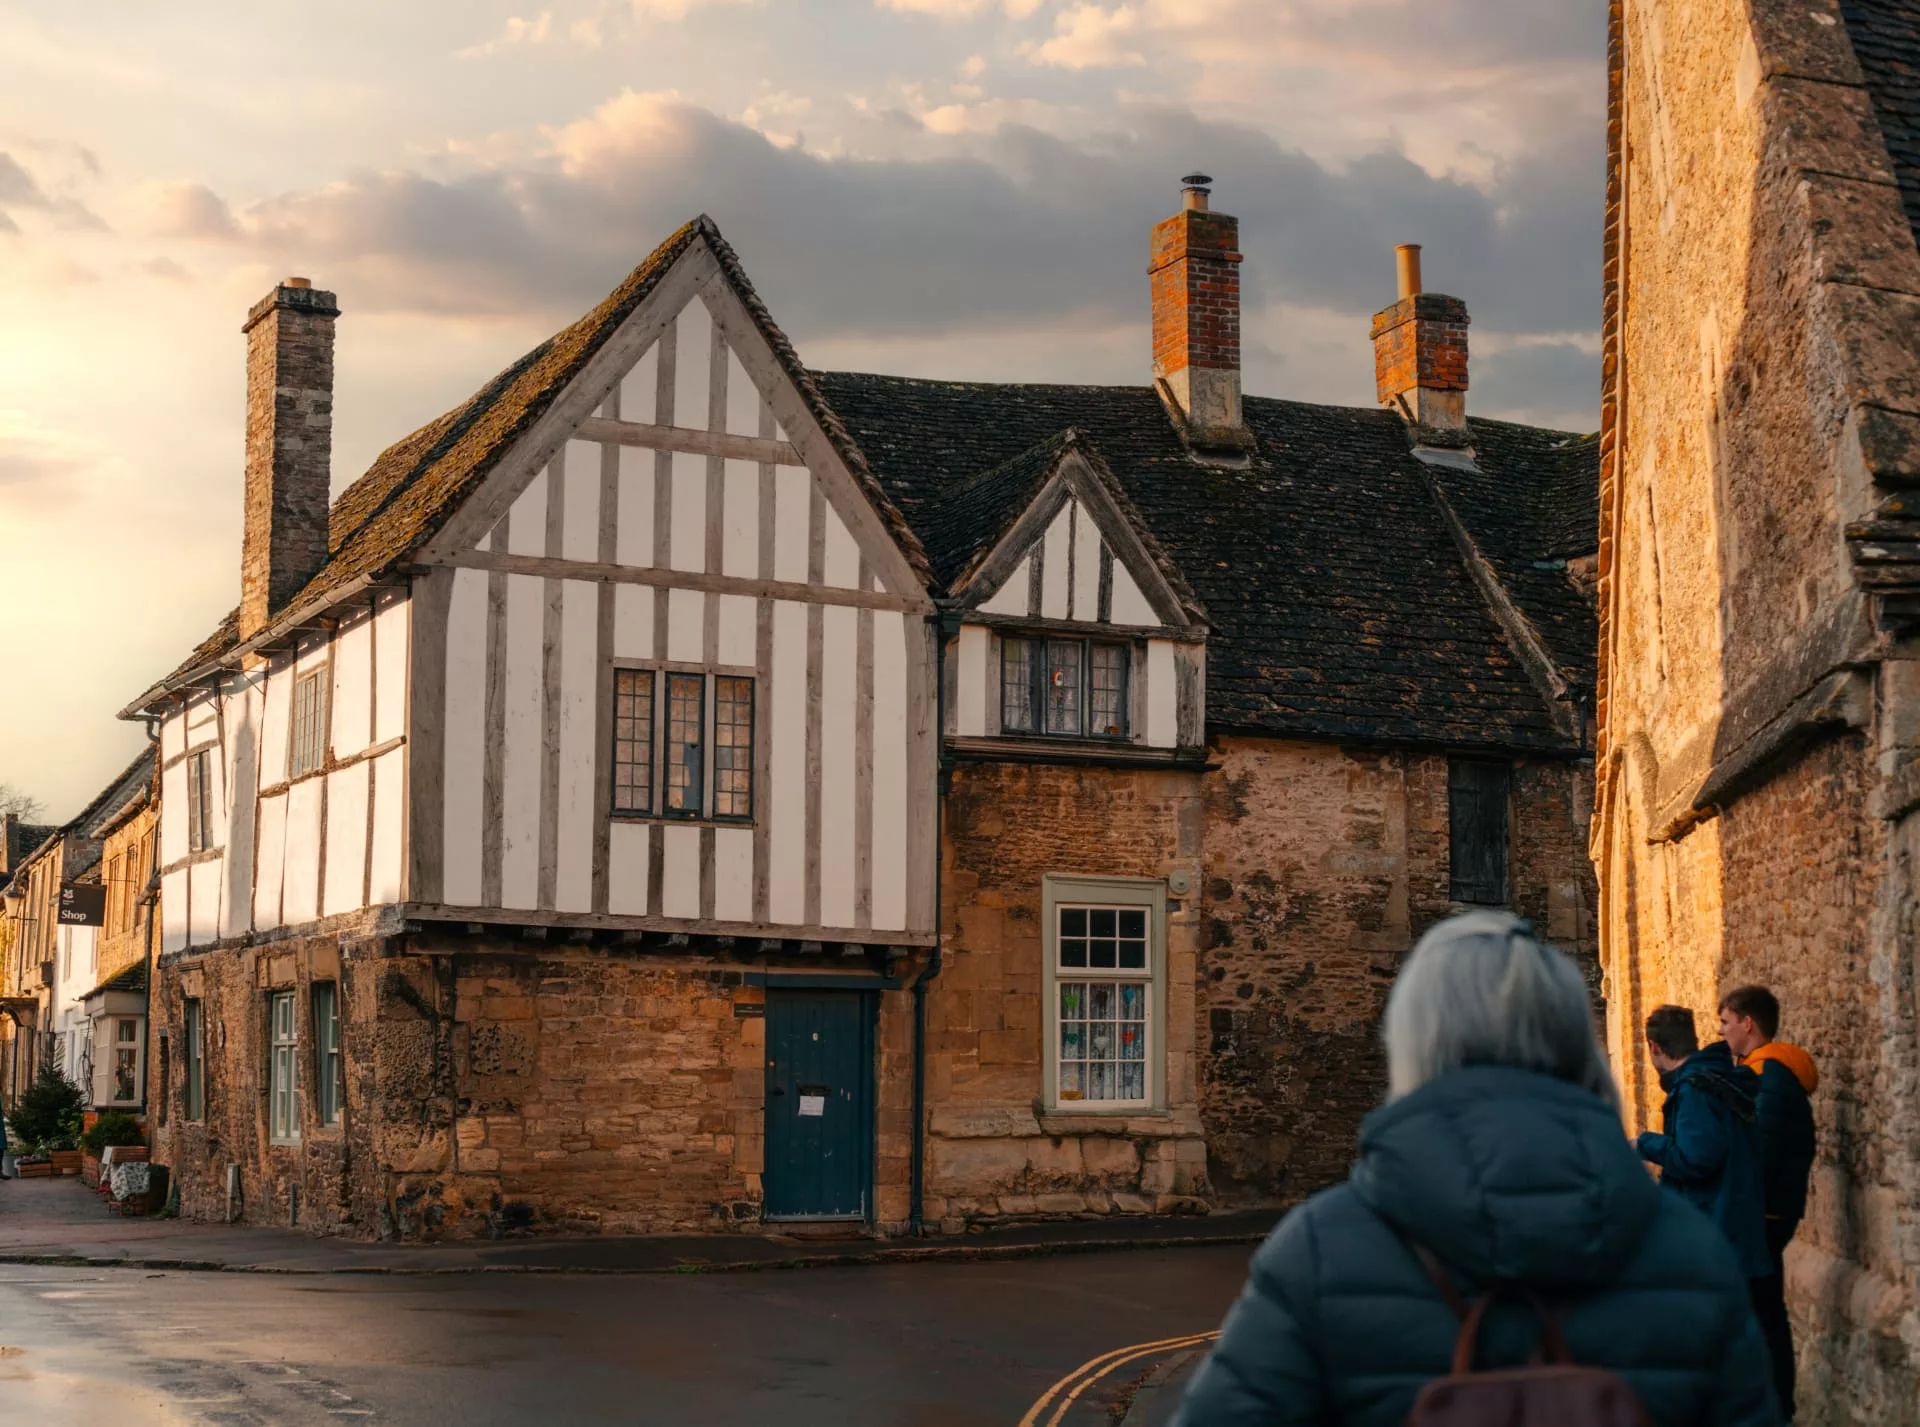 A street in Lacock with historic stone buildings. The sky is of pink hue and a woman and two young boys stand in the foreground of the image.